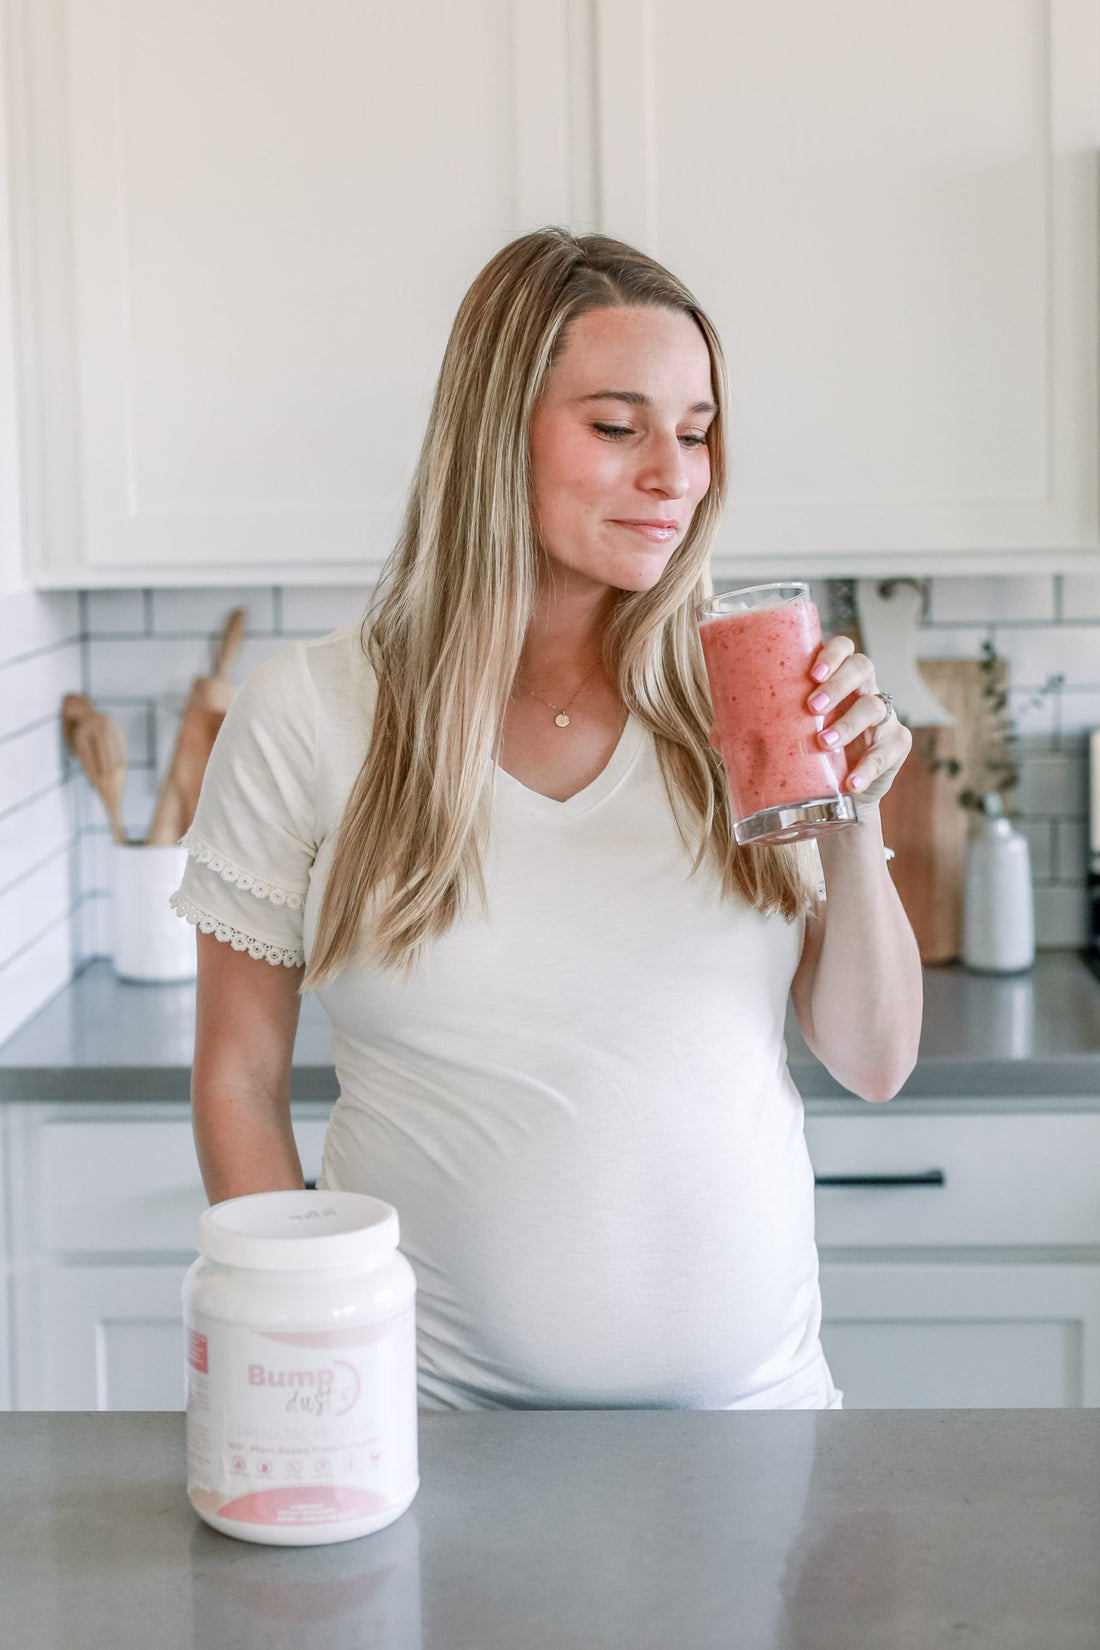 How to Maintain Healthy Weight During Pregnancy (and burn fat!)